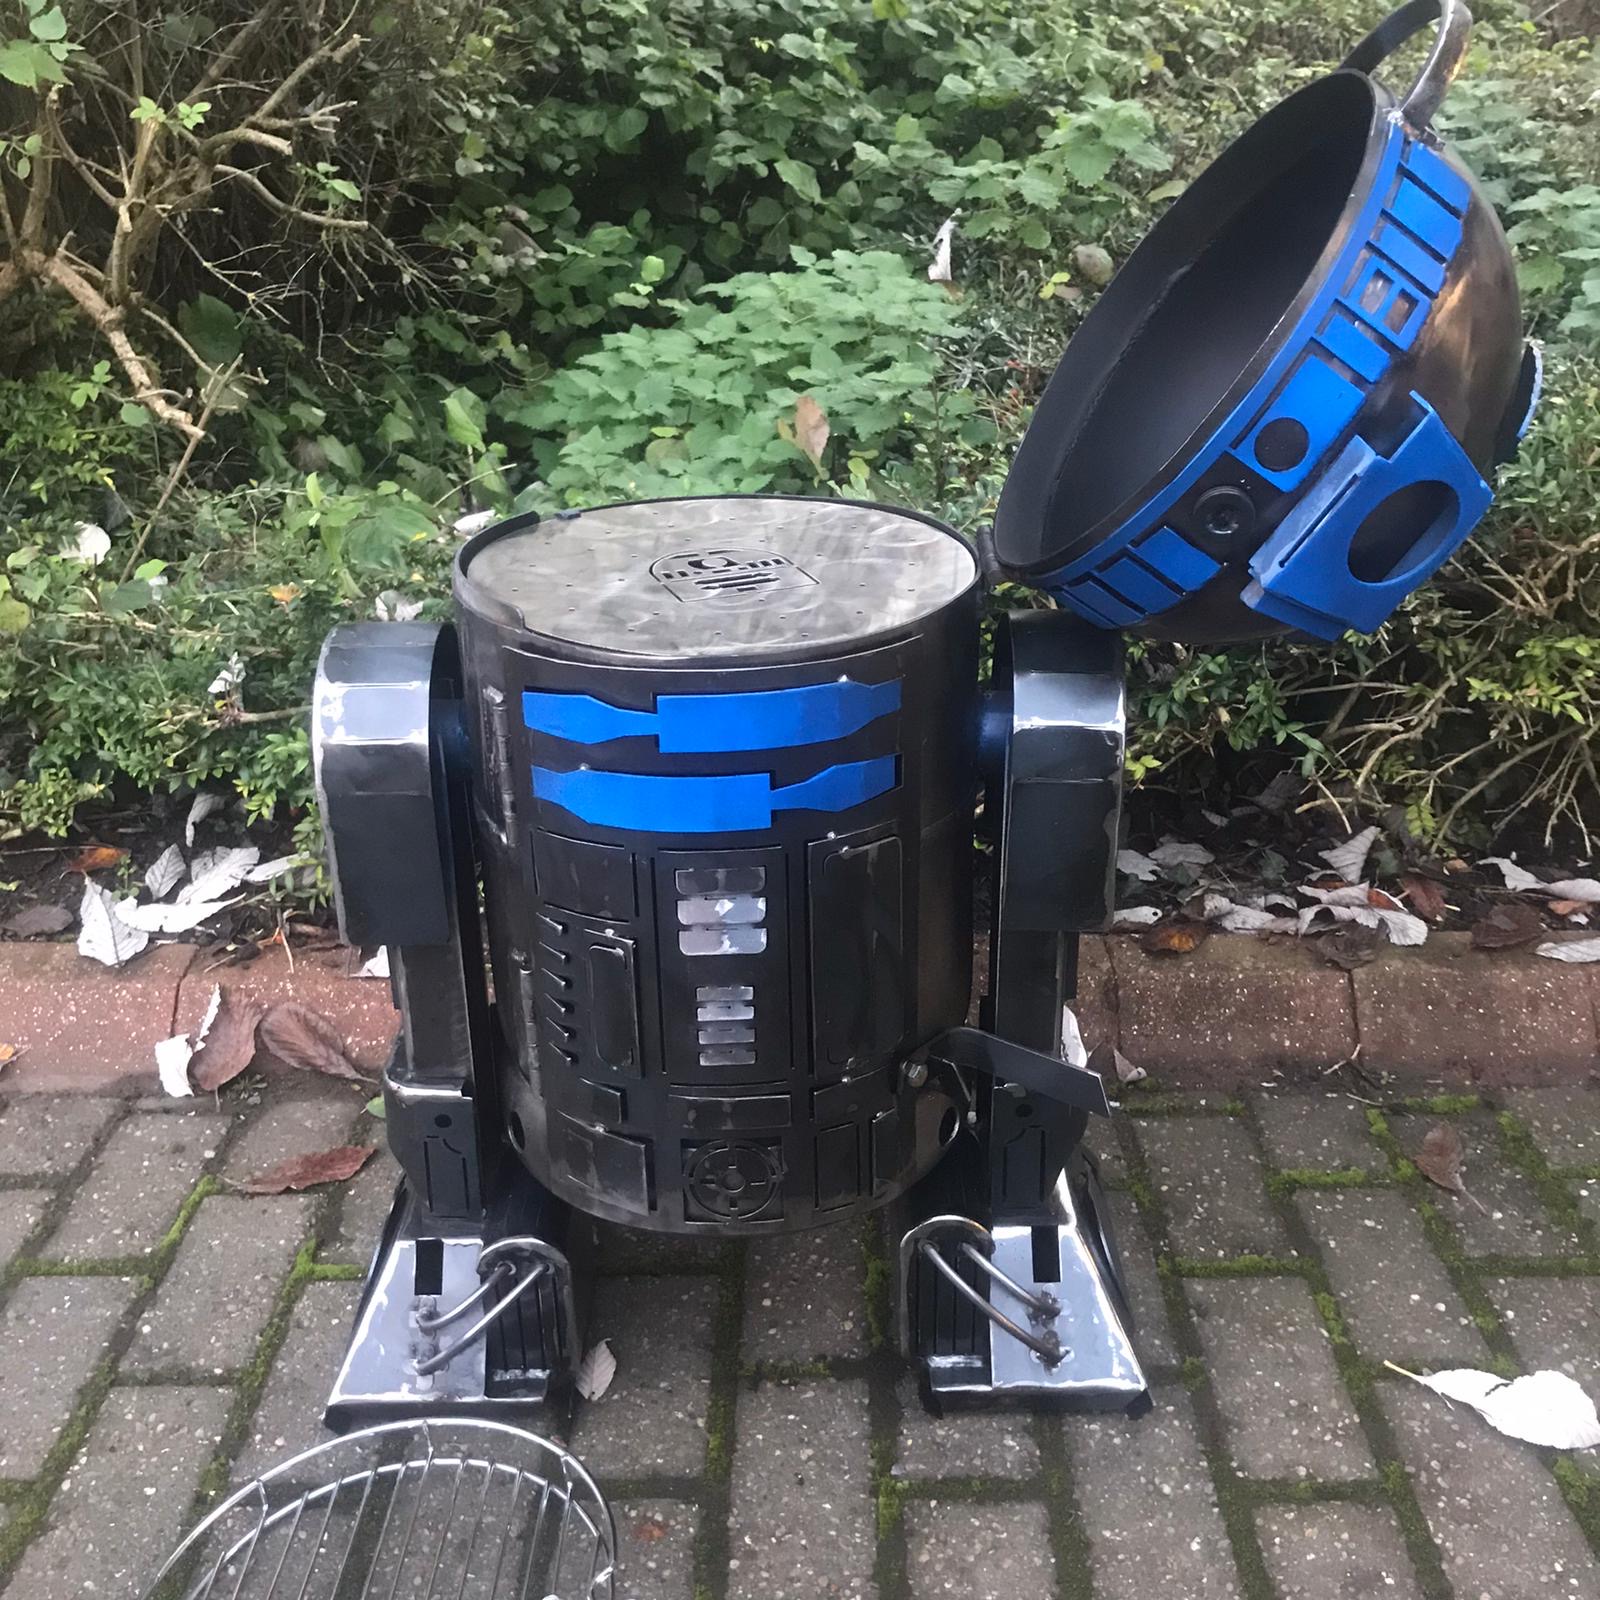 Star Wars R2D2 Wood Burner and Pizza Oven